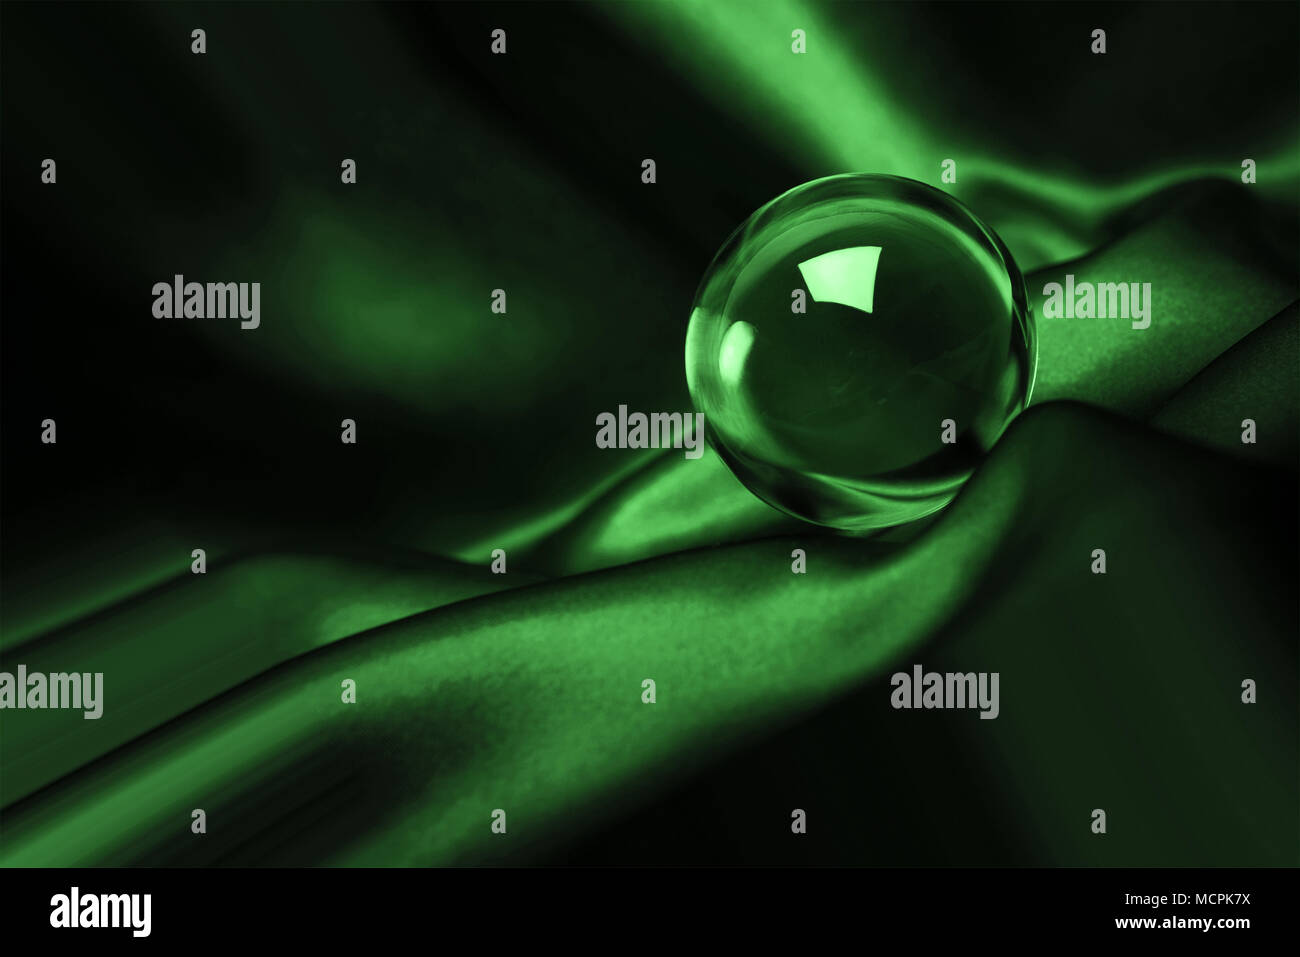 Abstrasct glowing crystal ball futuristic background Stock Photo